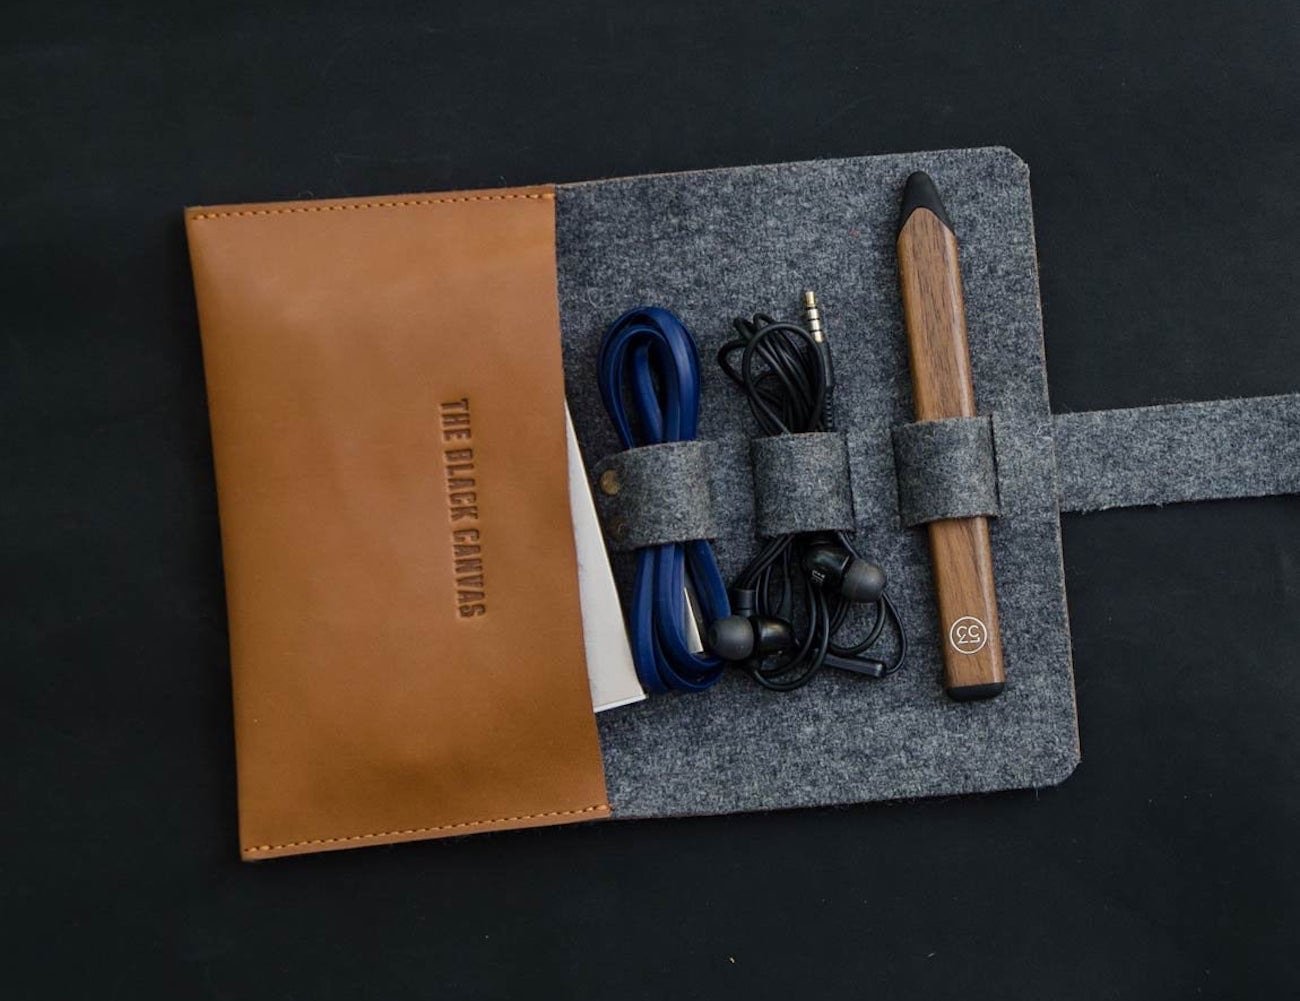 The Black Canvas leather & felt USB cable organizer makes for easy carrying